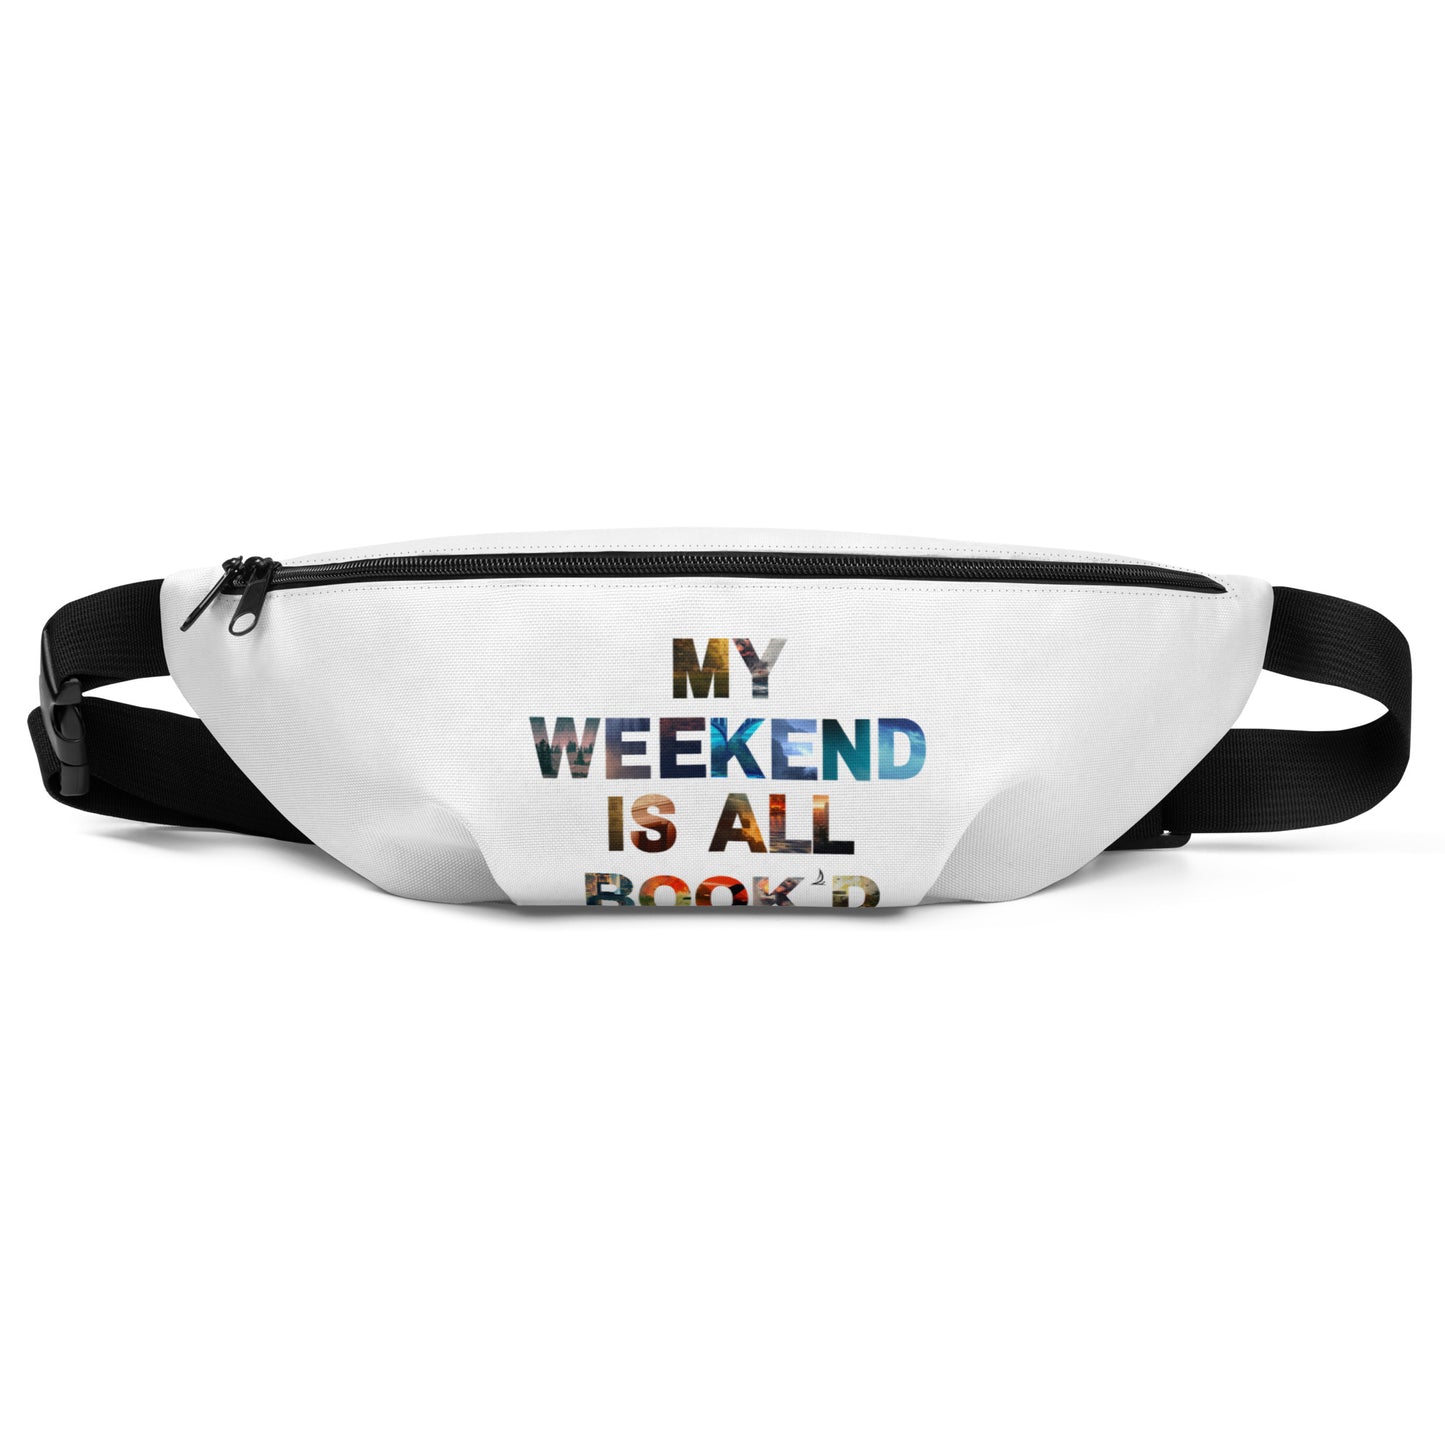 Weekend is Book'd | Fanny Pack